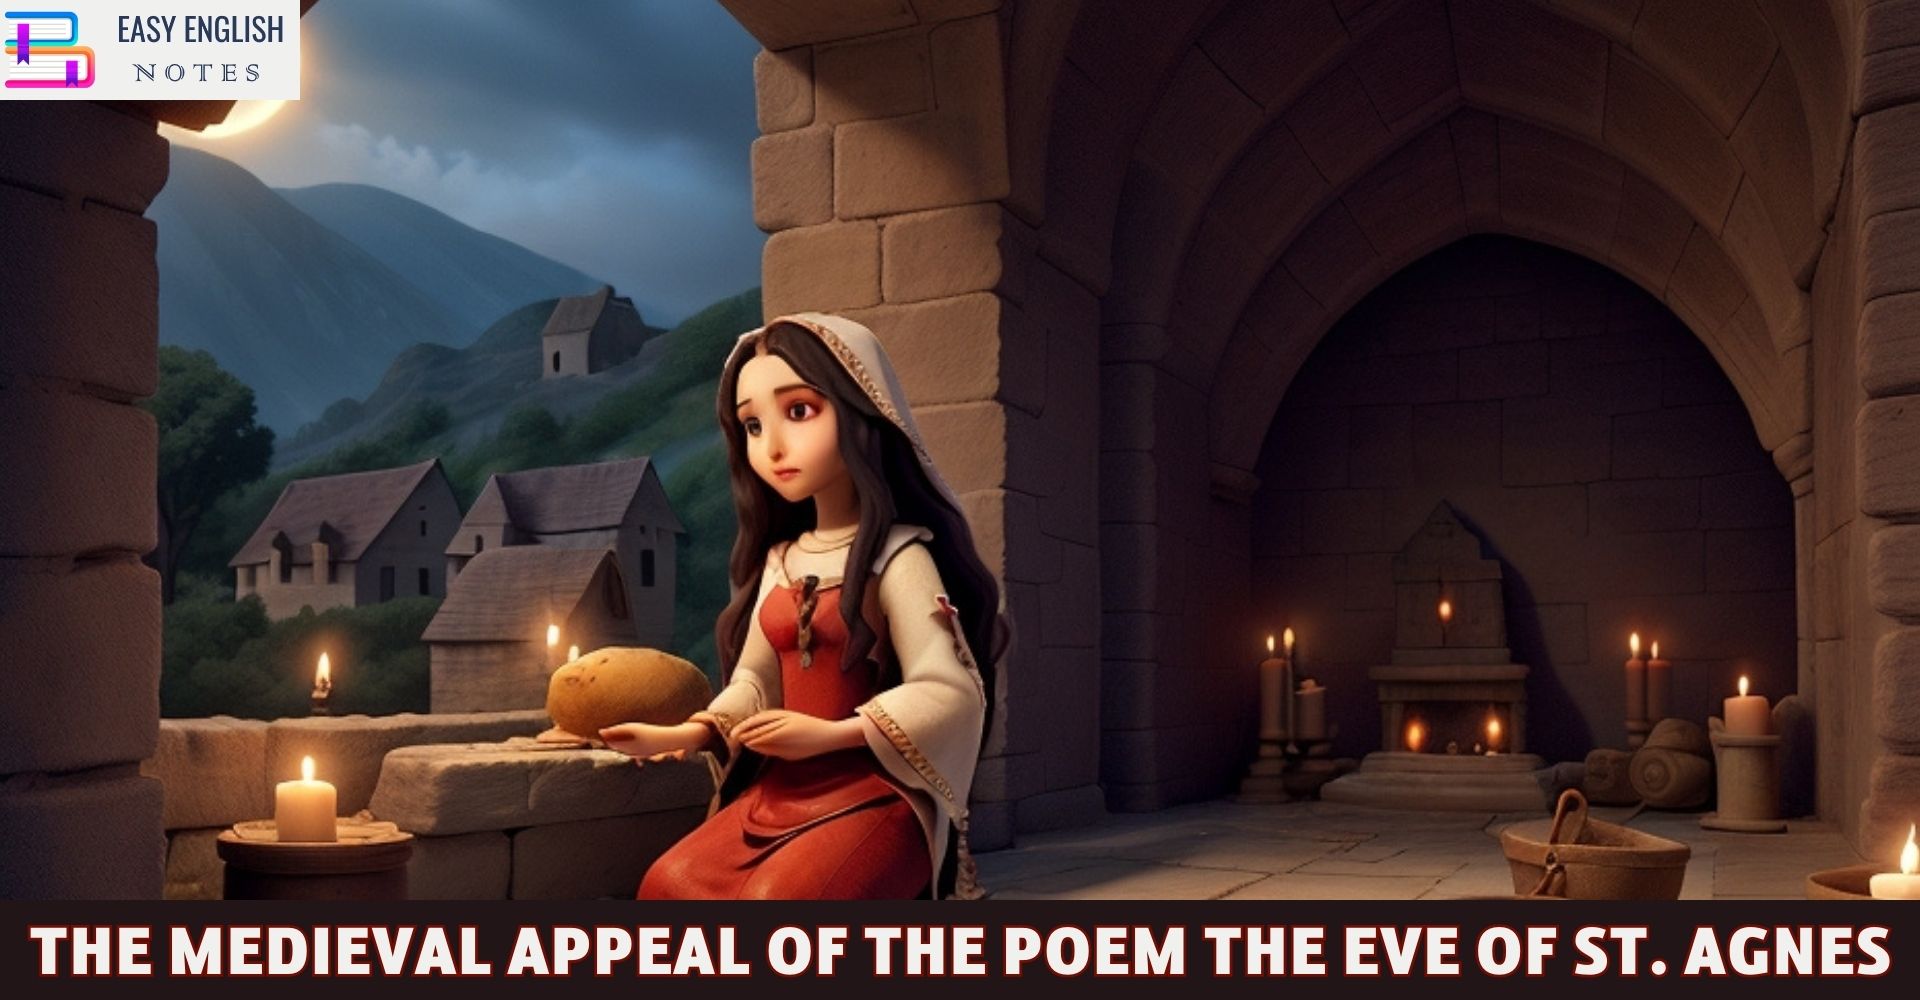 The Medieval Appeal Of The Poem The Eve of St. Agnes